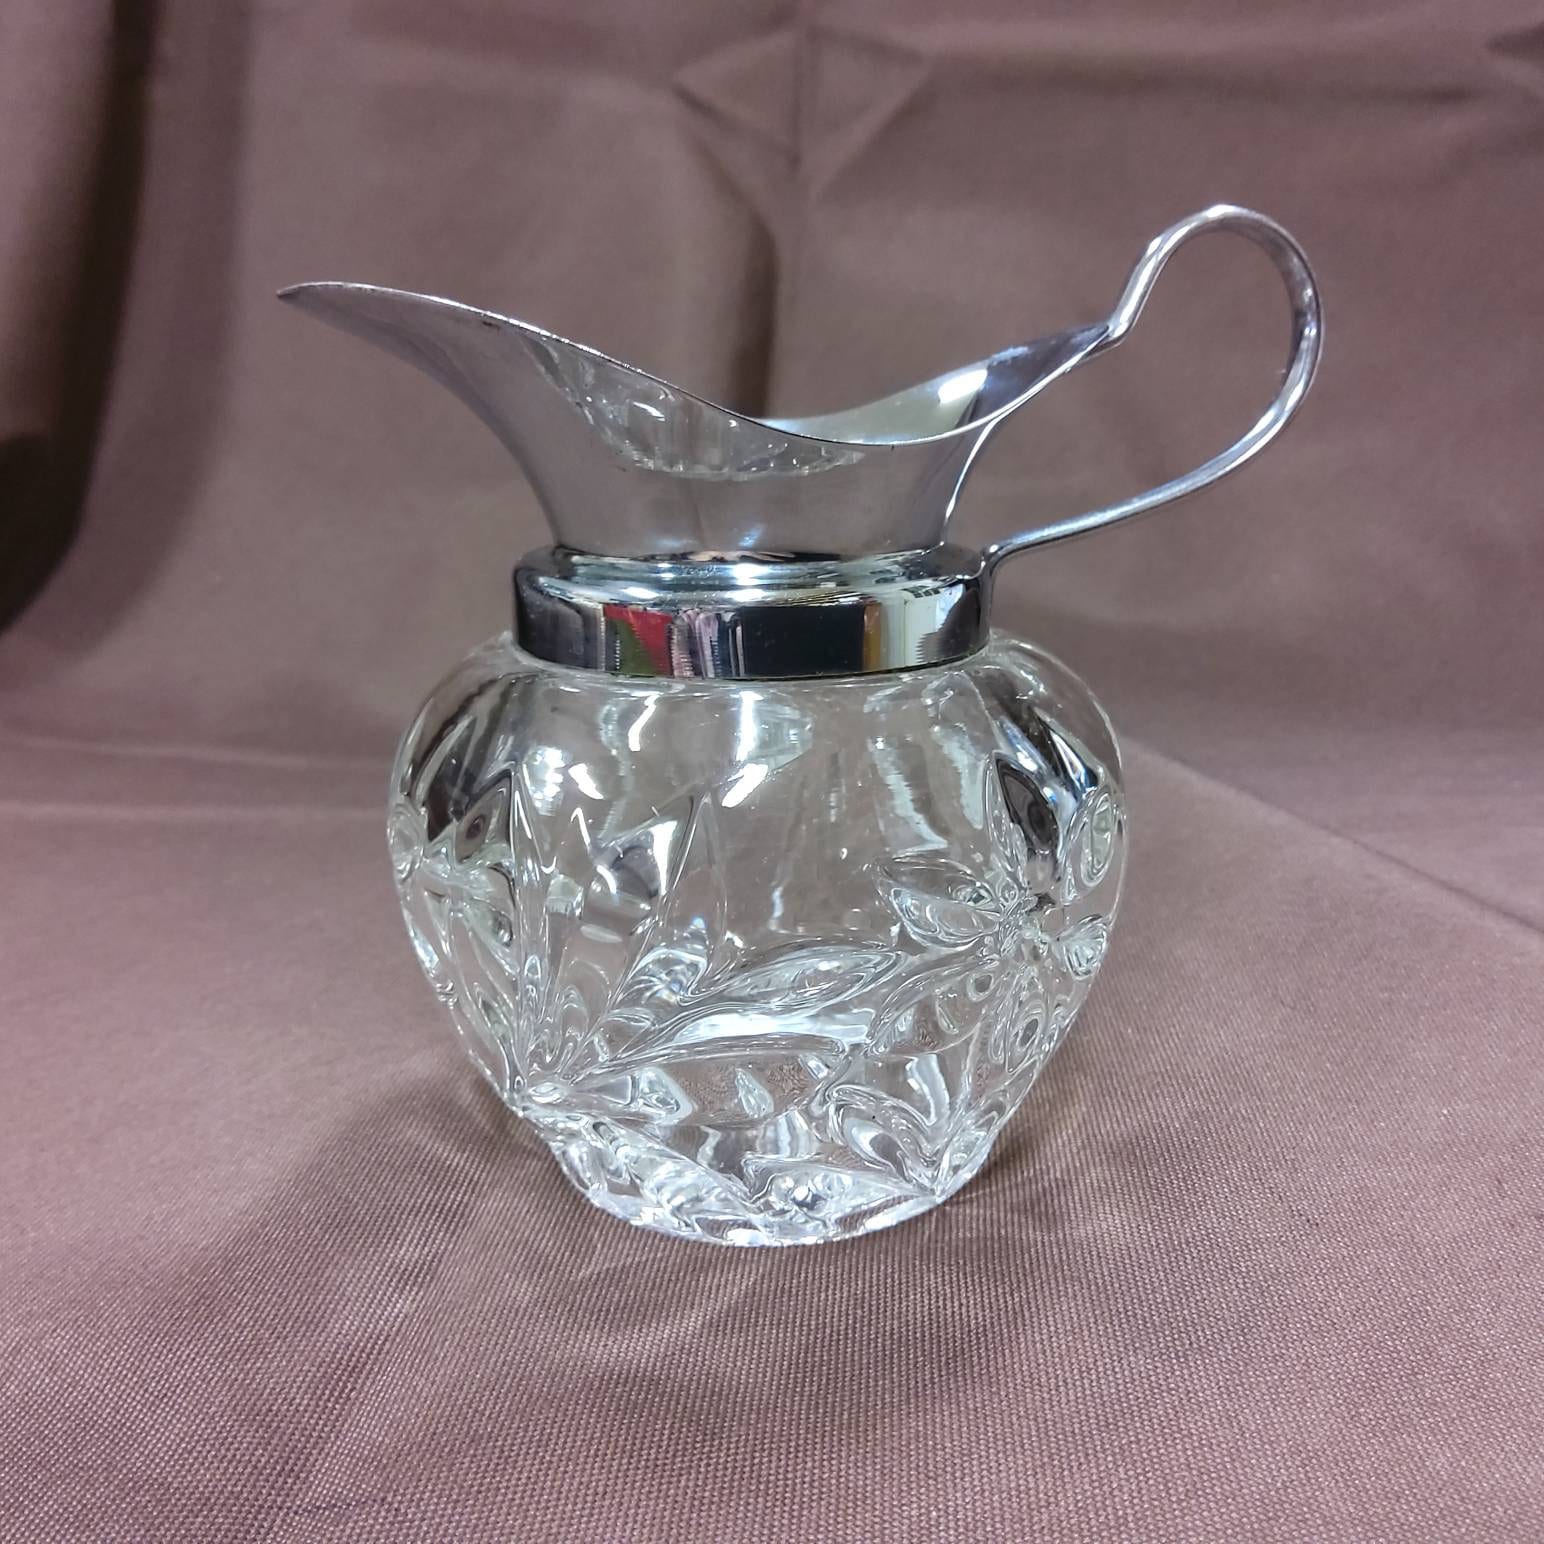 Small Cut Glass Pitcher With Silvertone Spout and Handle. No Maker's Mark  Found. Floral Designs in the Clear Cut Glass. 